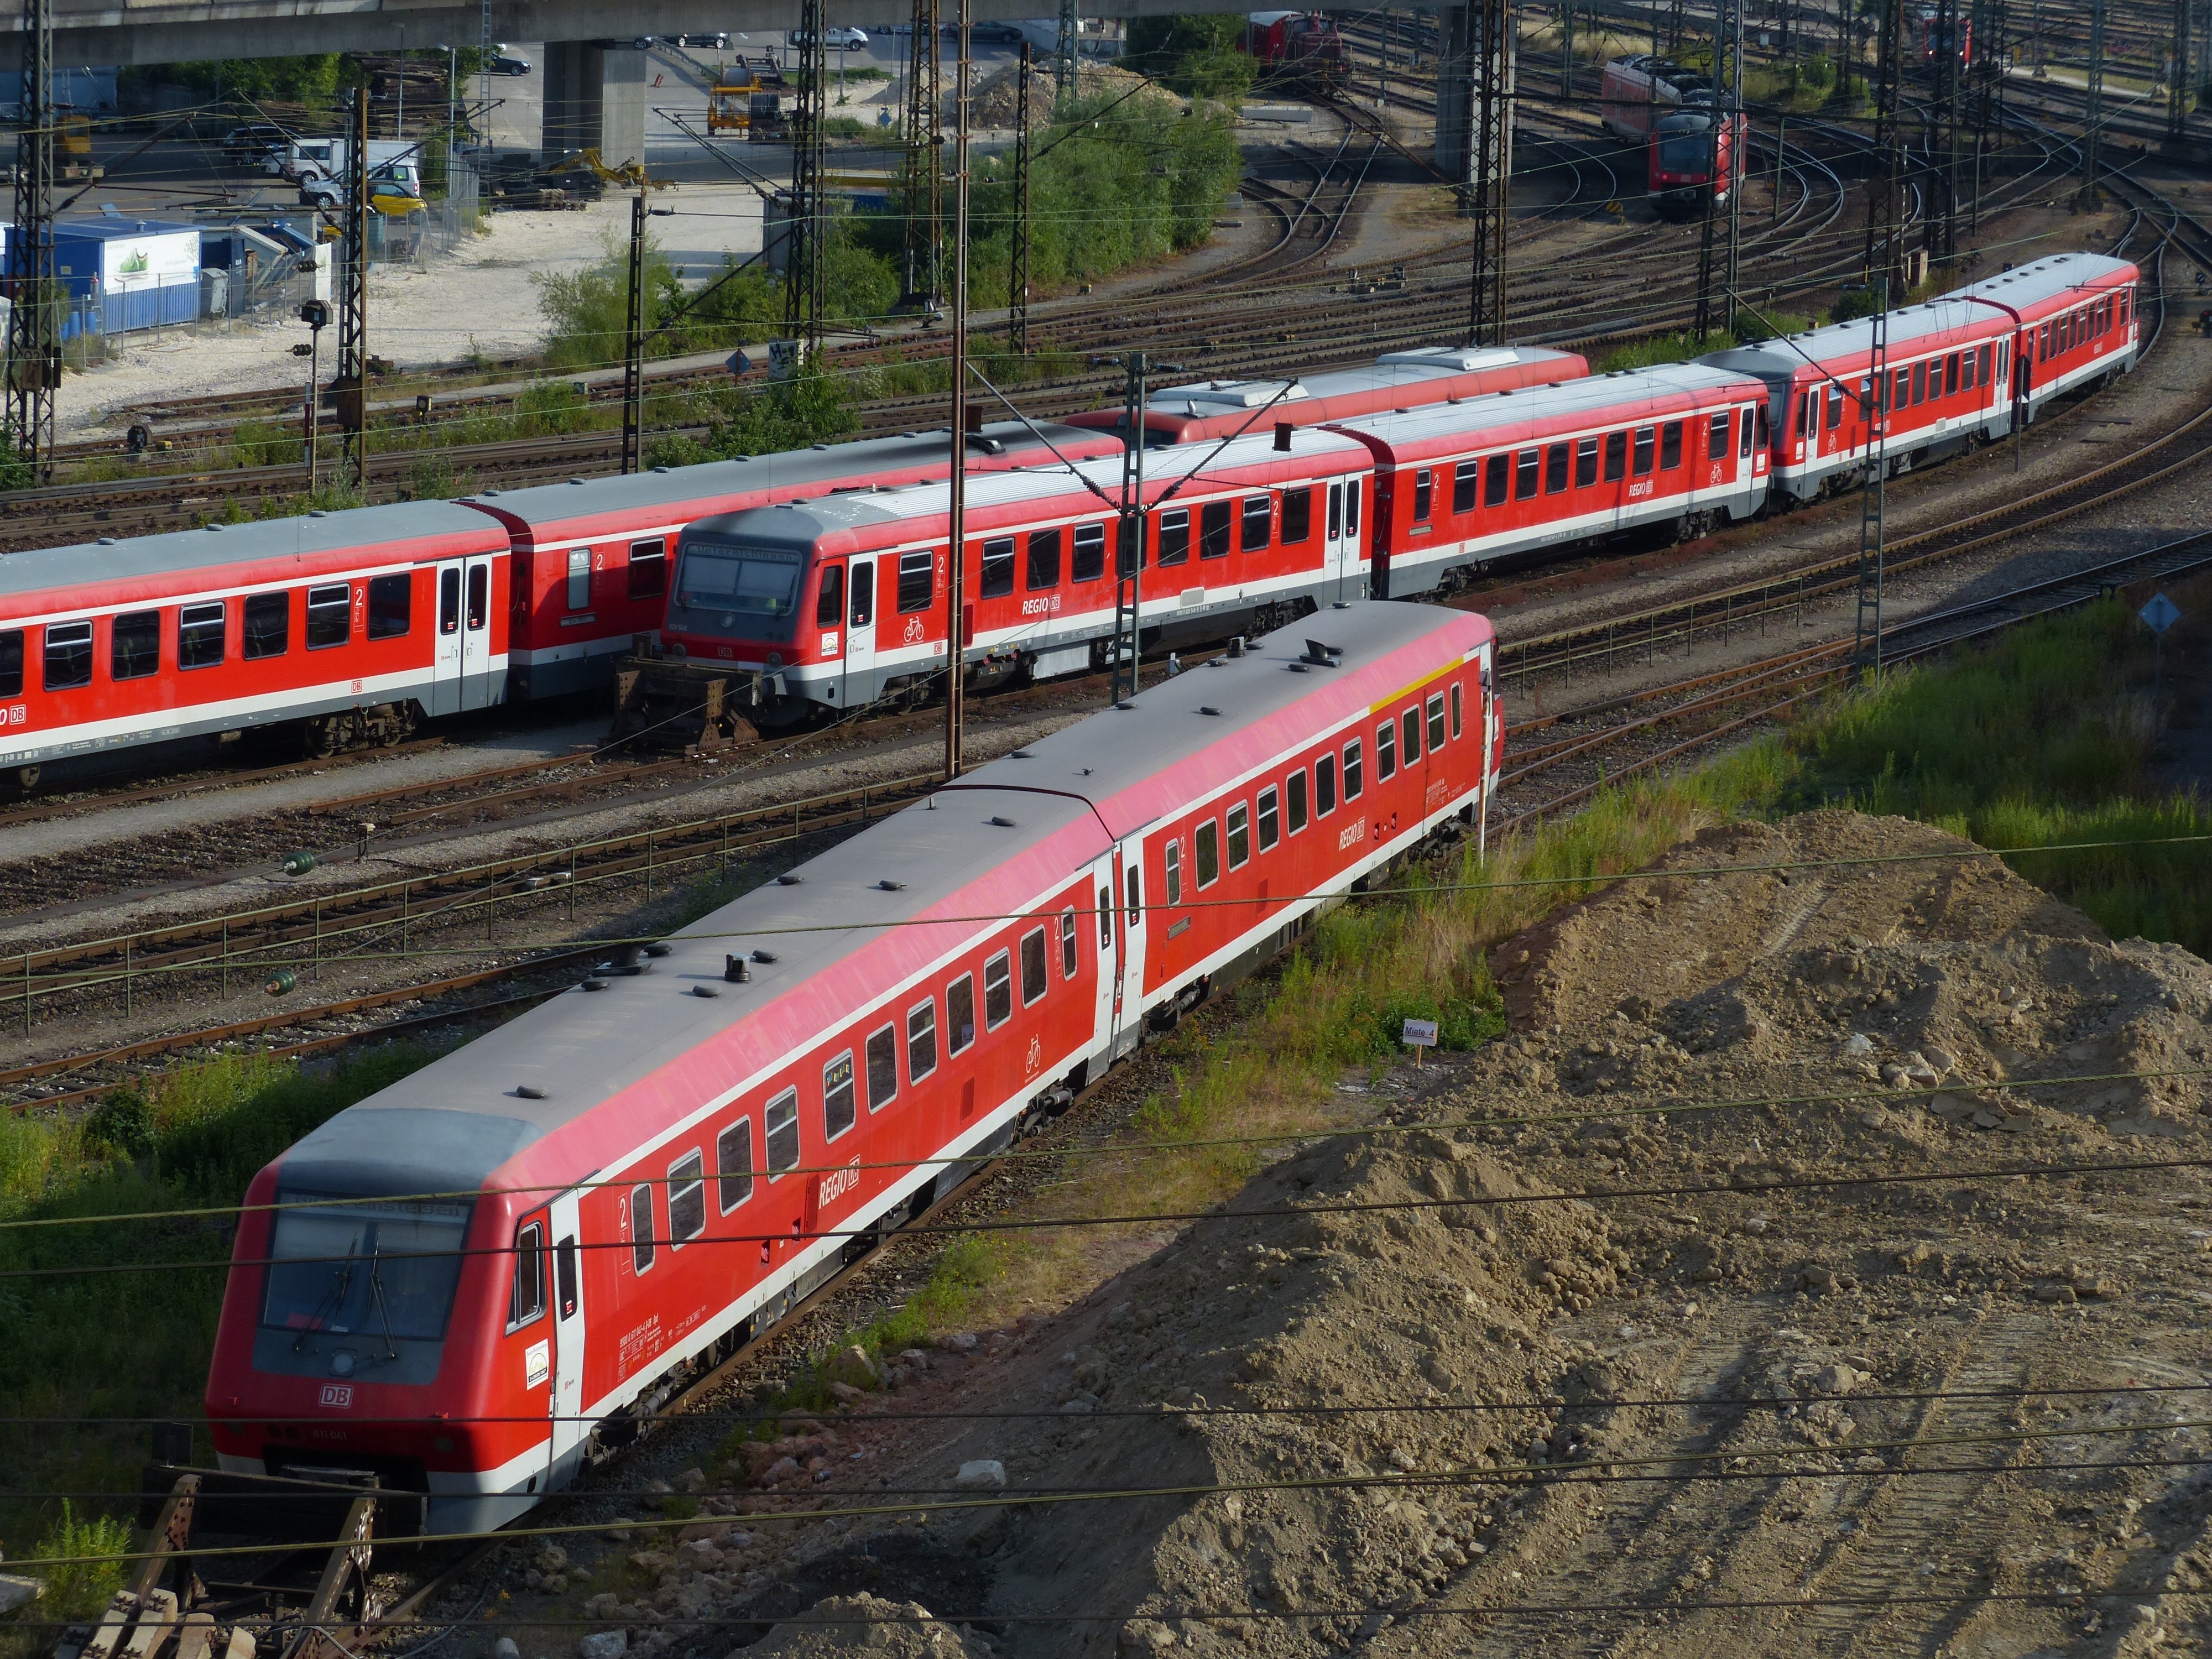 3 red and silver trains